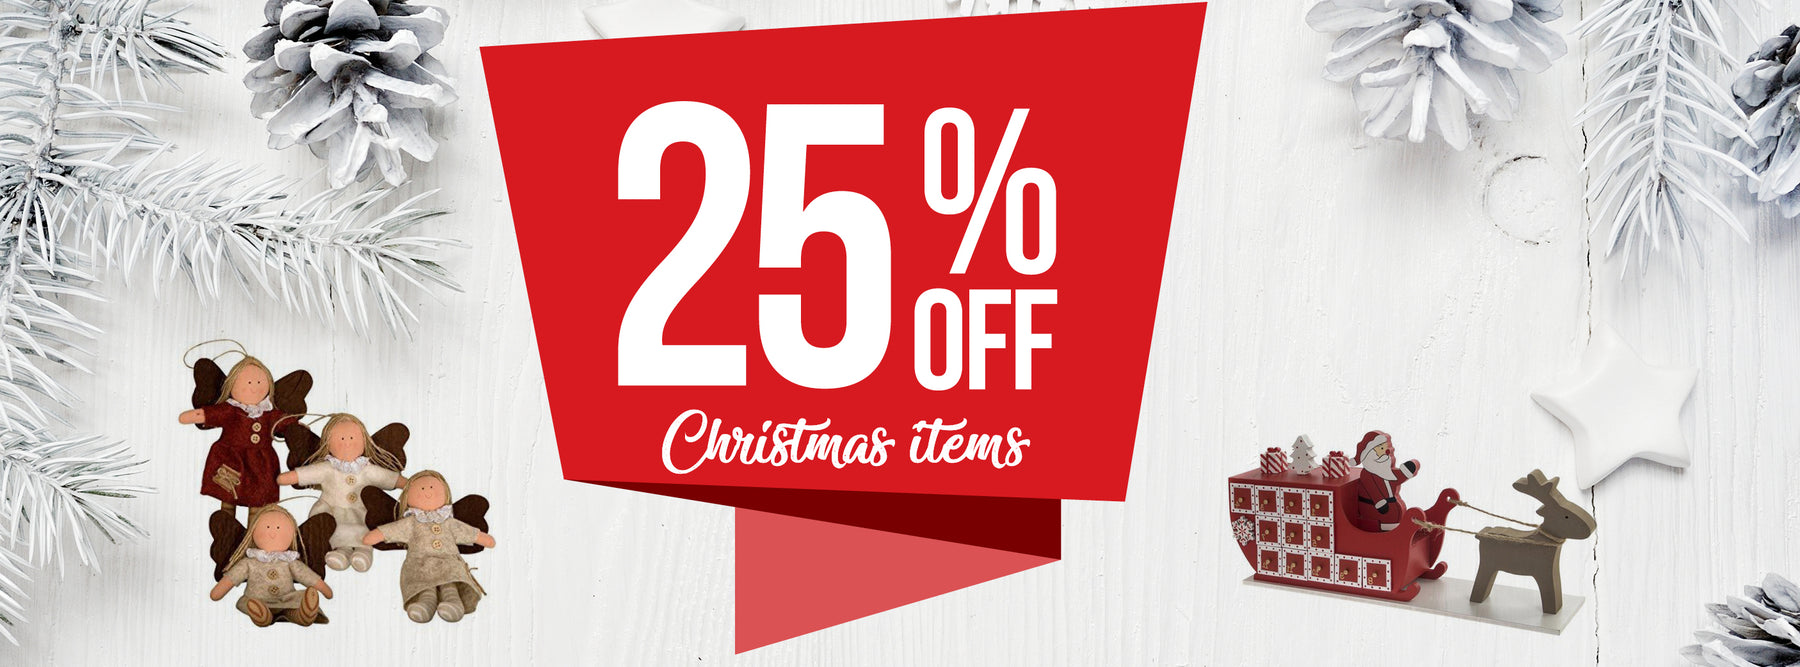 Grab a bargain while storing your Christmas Deco away!